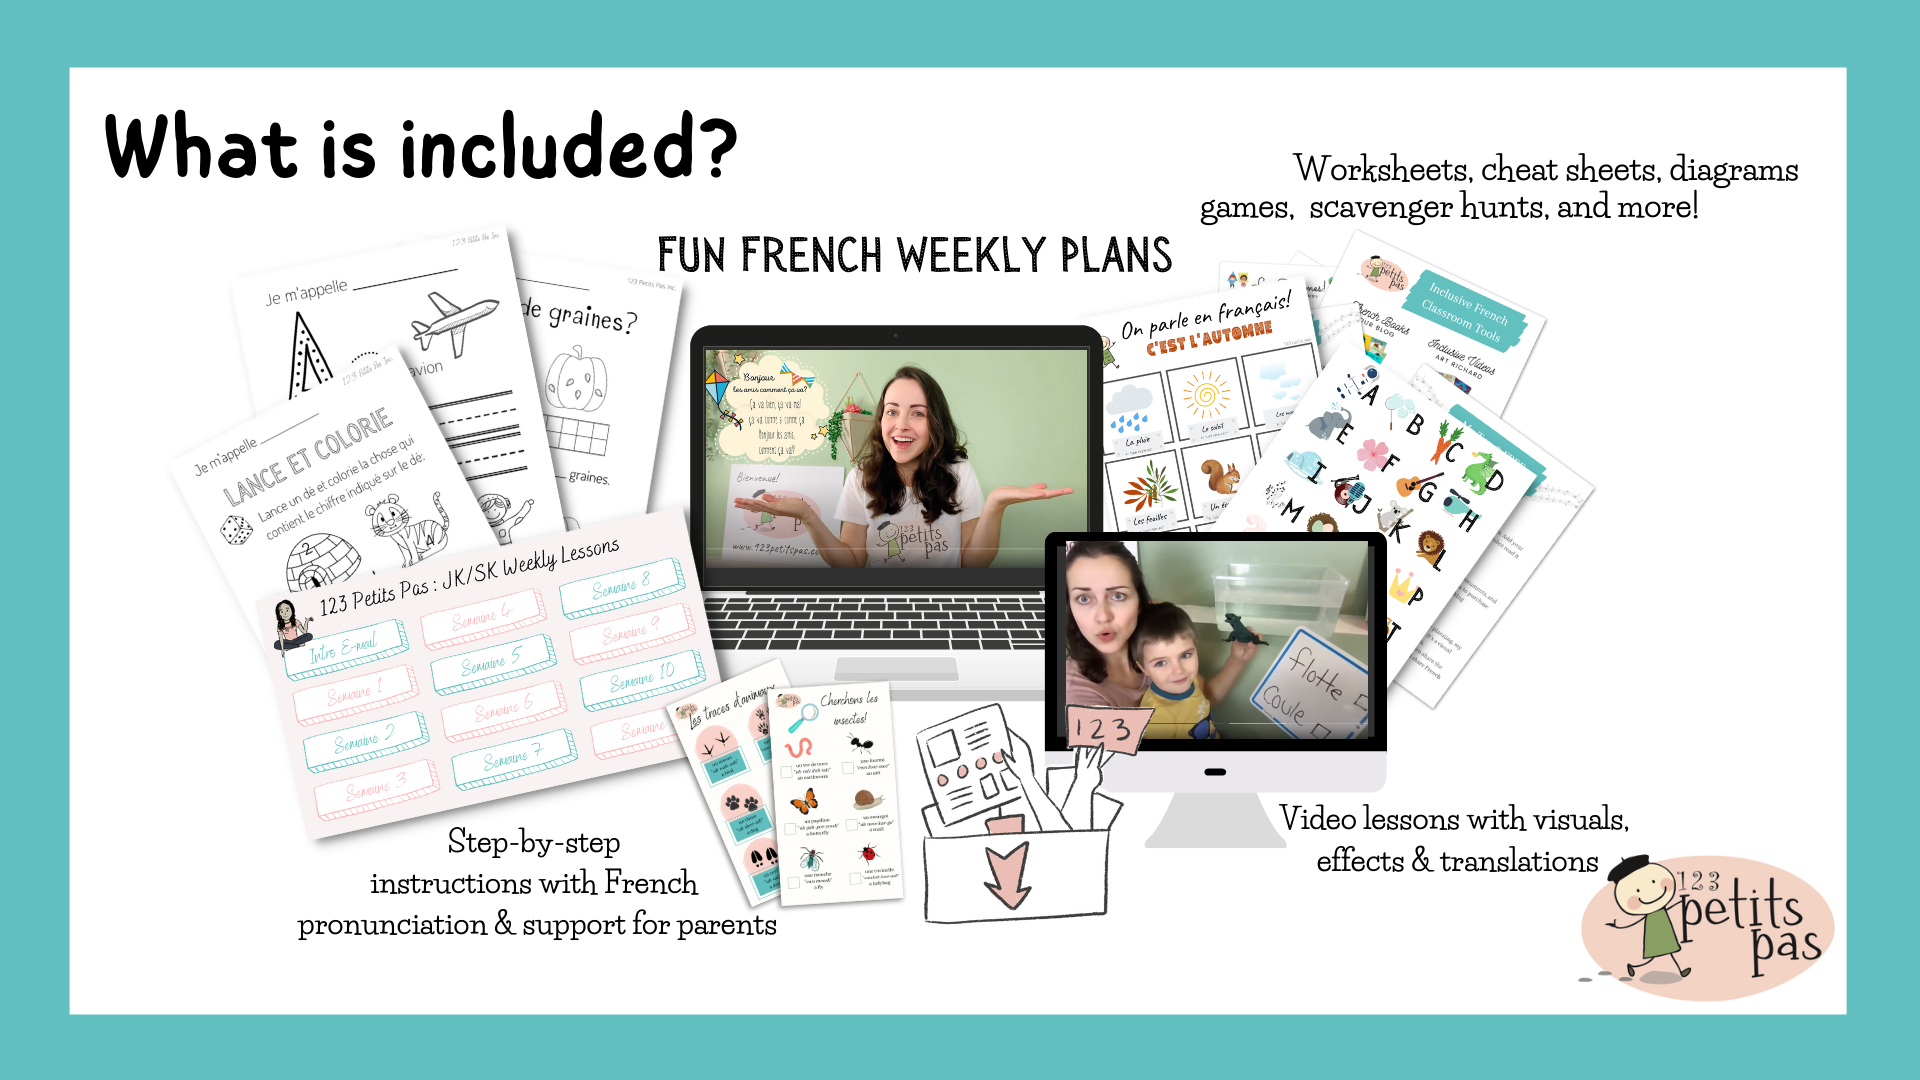 A mock up with images of French cheat sheets, French worksheets, surrounding a laptop screen with images of a French teacher instructing children.